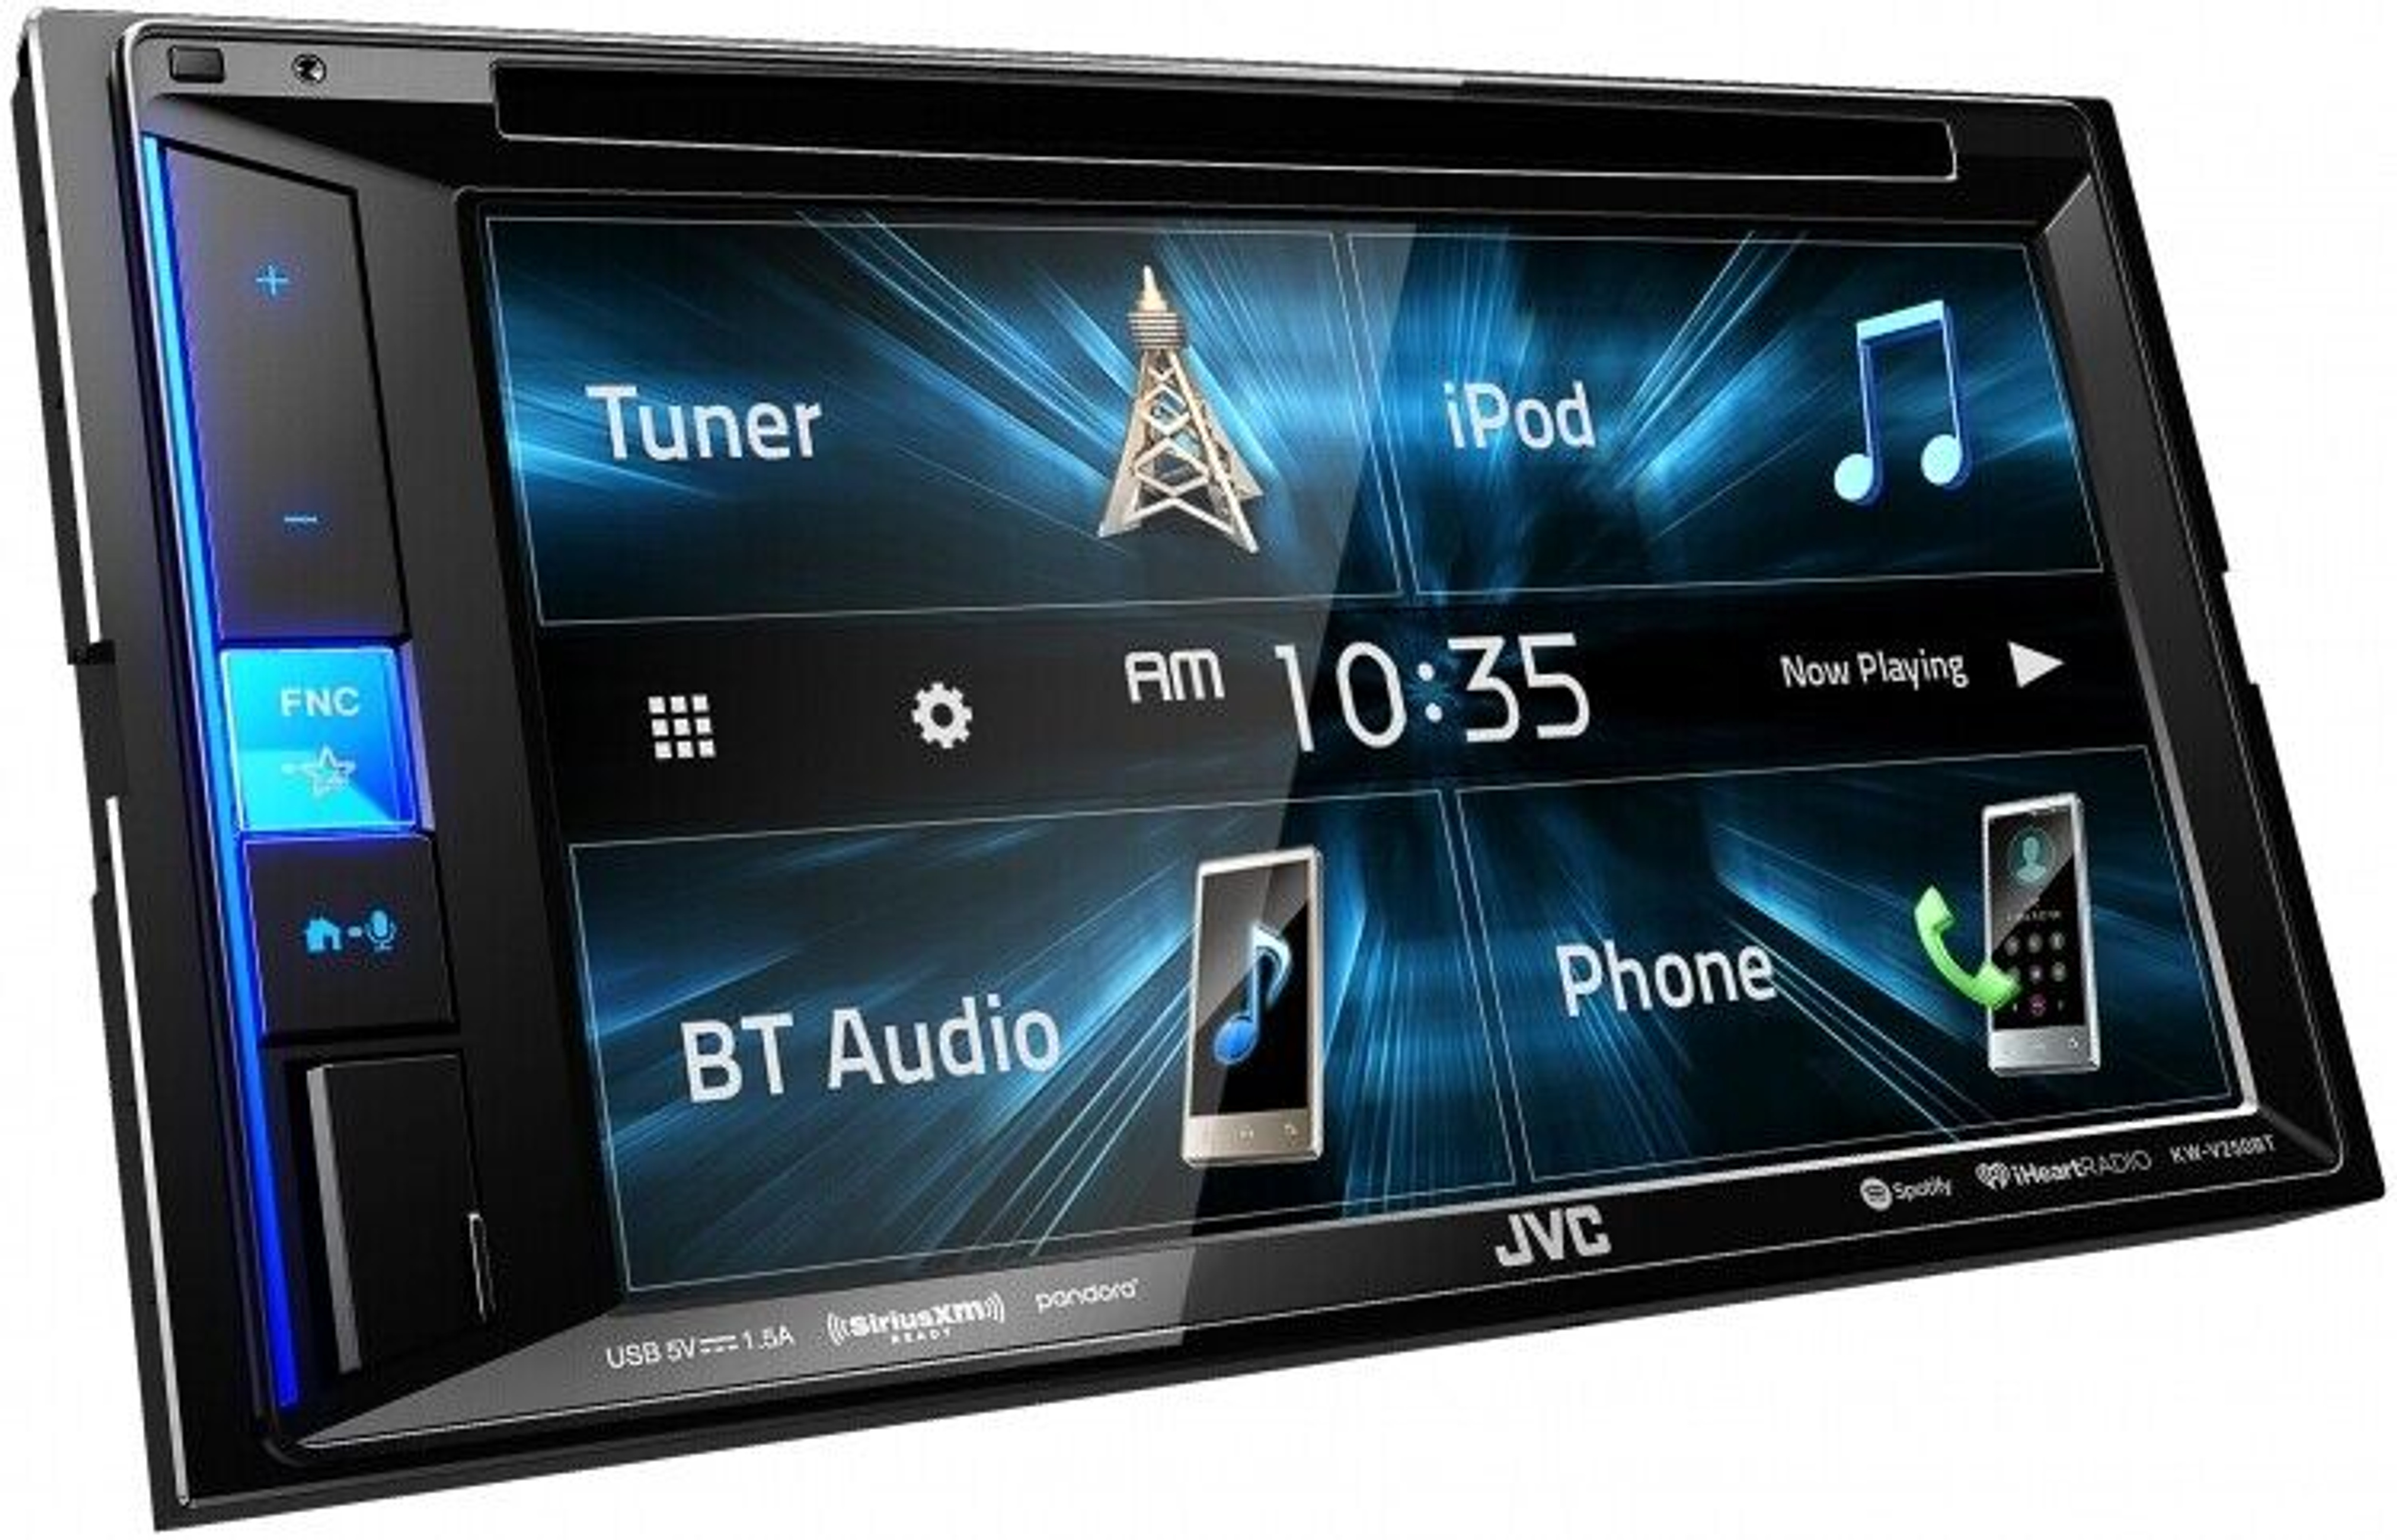 JVC KW-V250BT Double DIN Bluetooth 6.2" DVD/CD Stereo In-Dash Car Receiver